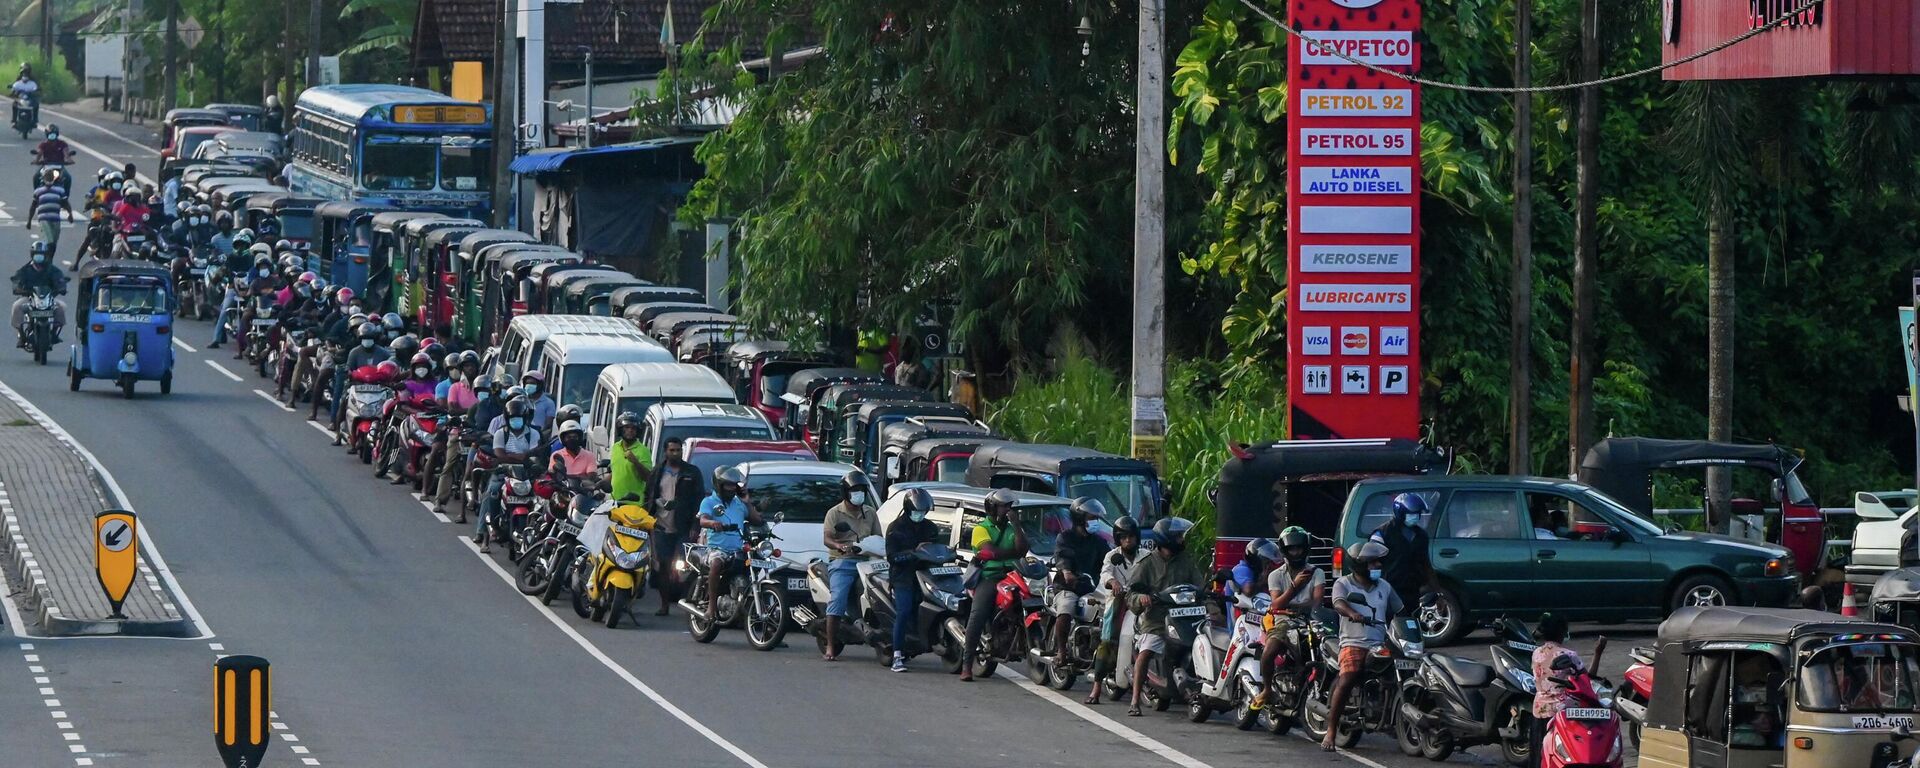 Motorists queue to buy fuel at a Ceylon petroleum corporation fuel station in Colombo on May 15, 2022. - Shortages of food, fuel and medicines, along with record inflation and lengthy blackouts, have brought severe hardships to the country's 22 million people. - Sputnik International, 1920, 16.05.2022